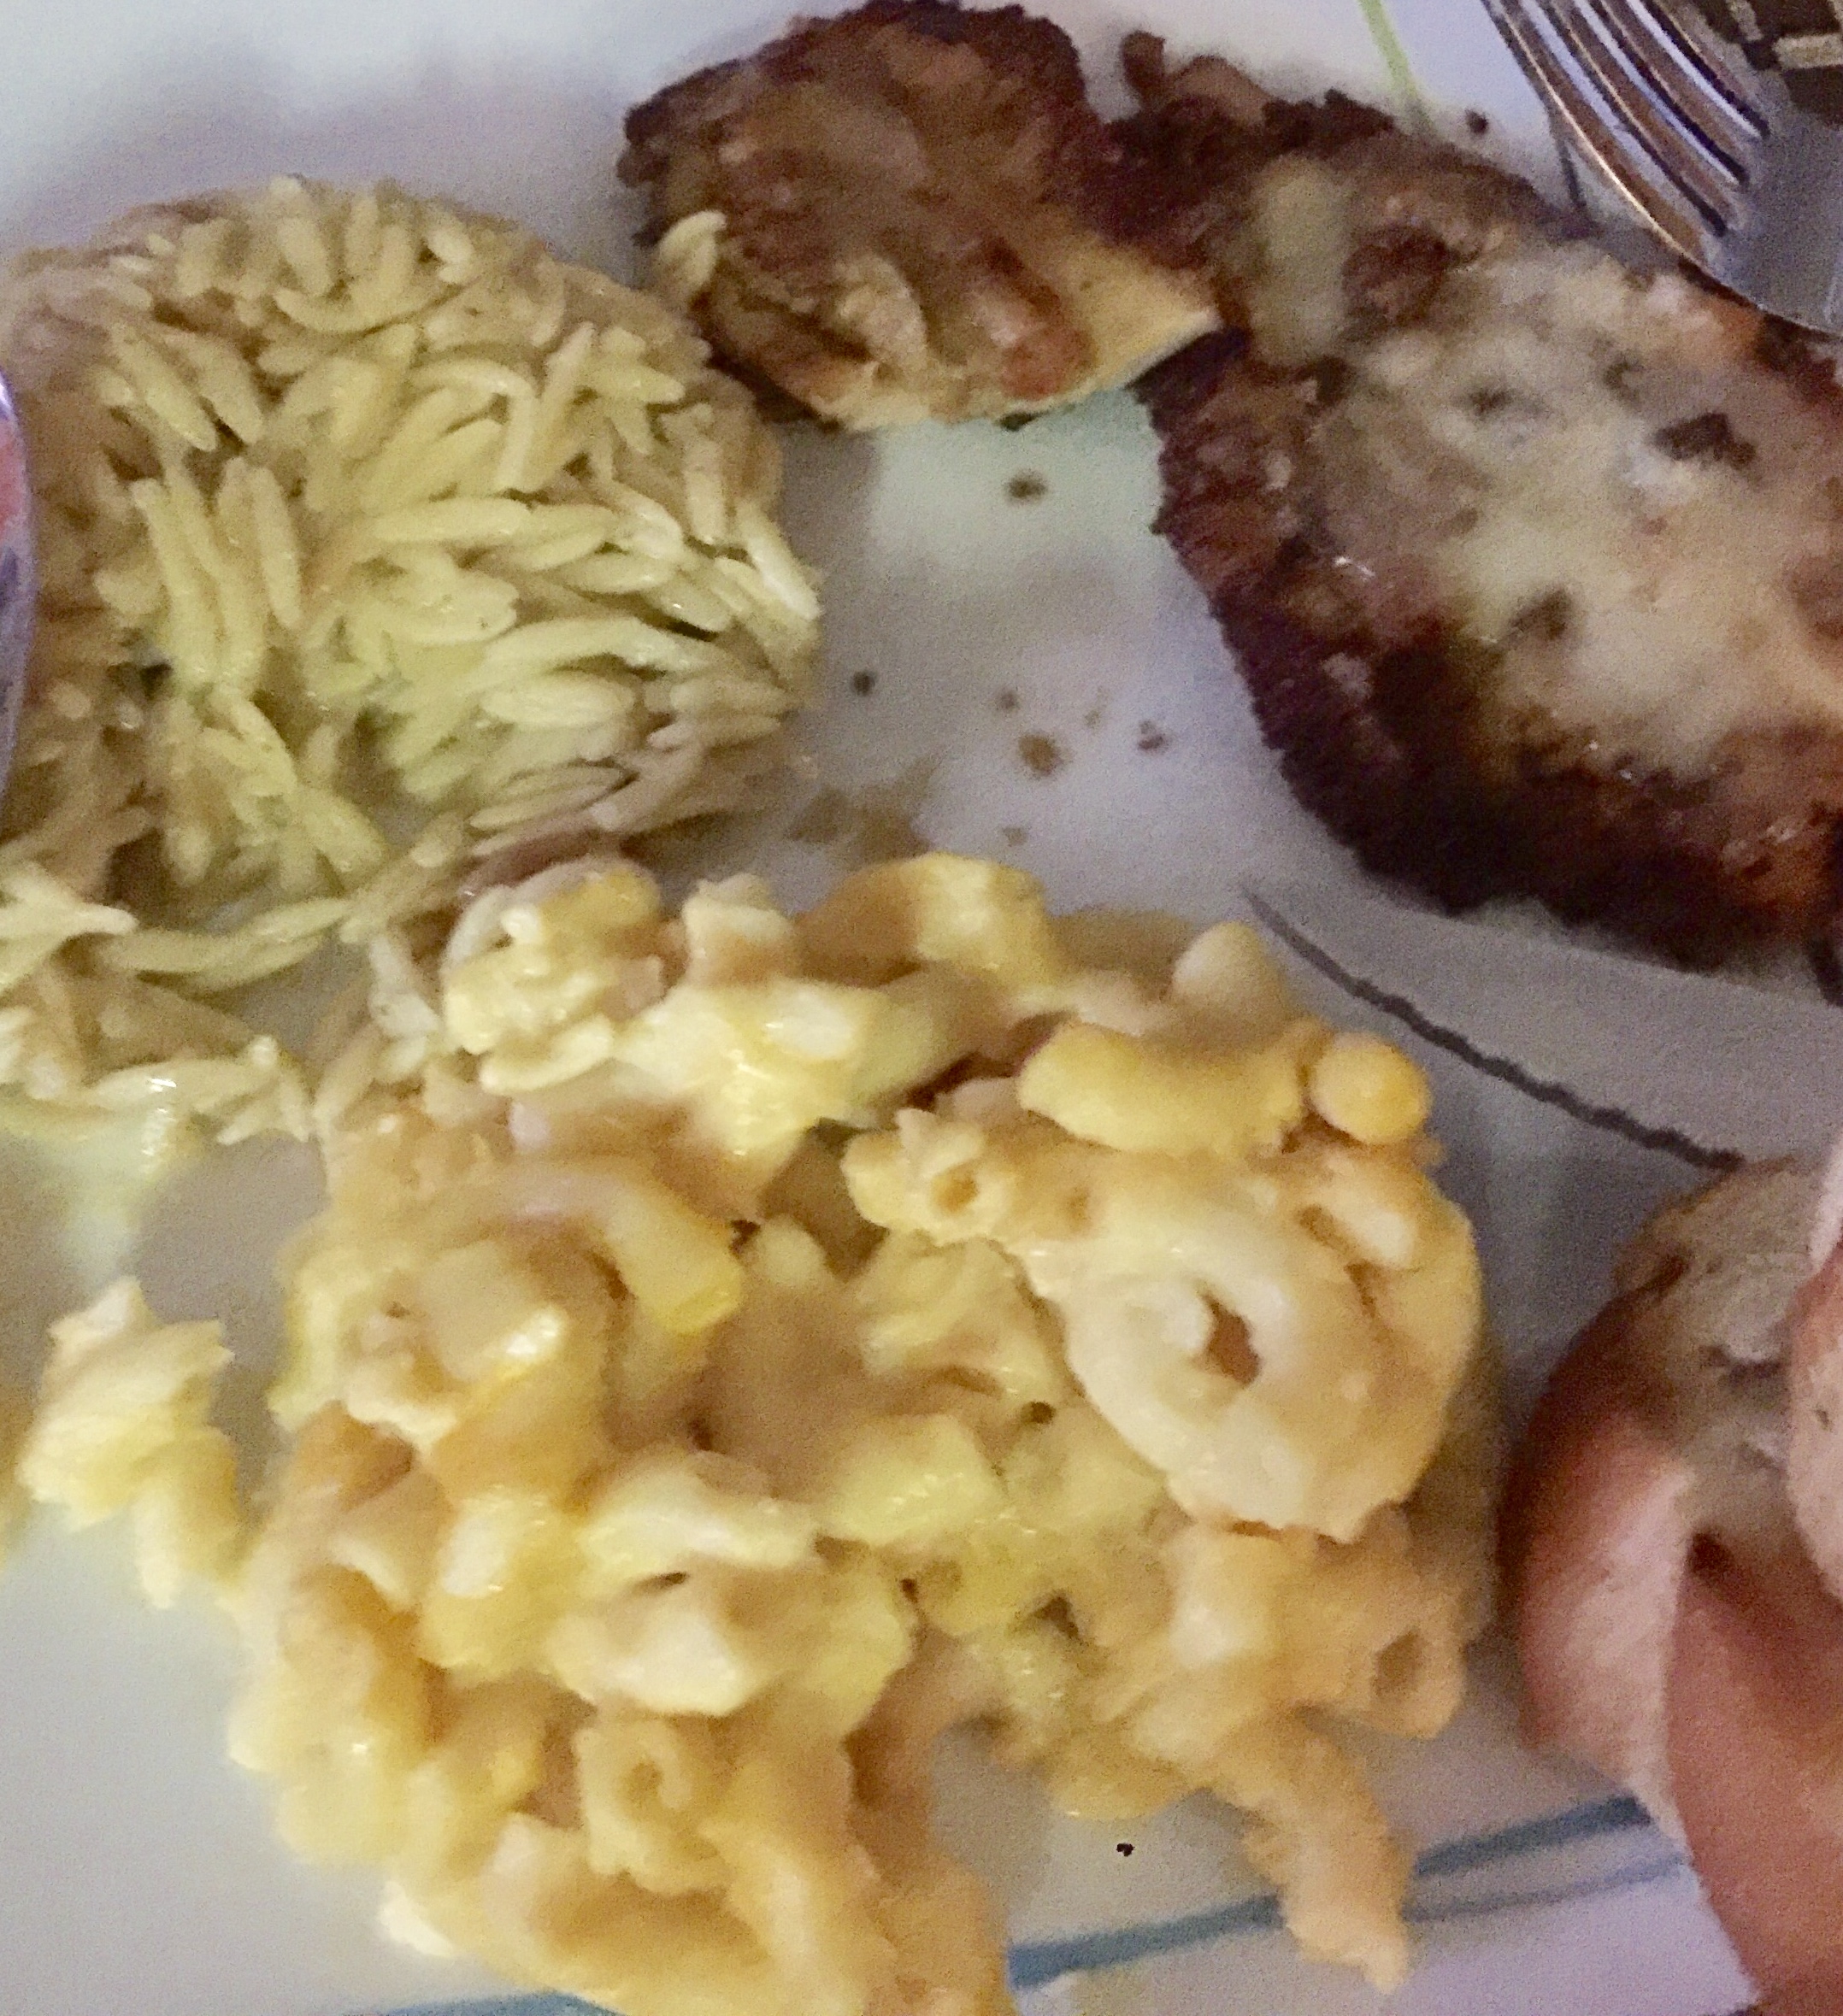 A plate with macaroni and cheese, orso pasta, parmesan chicken, and bread